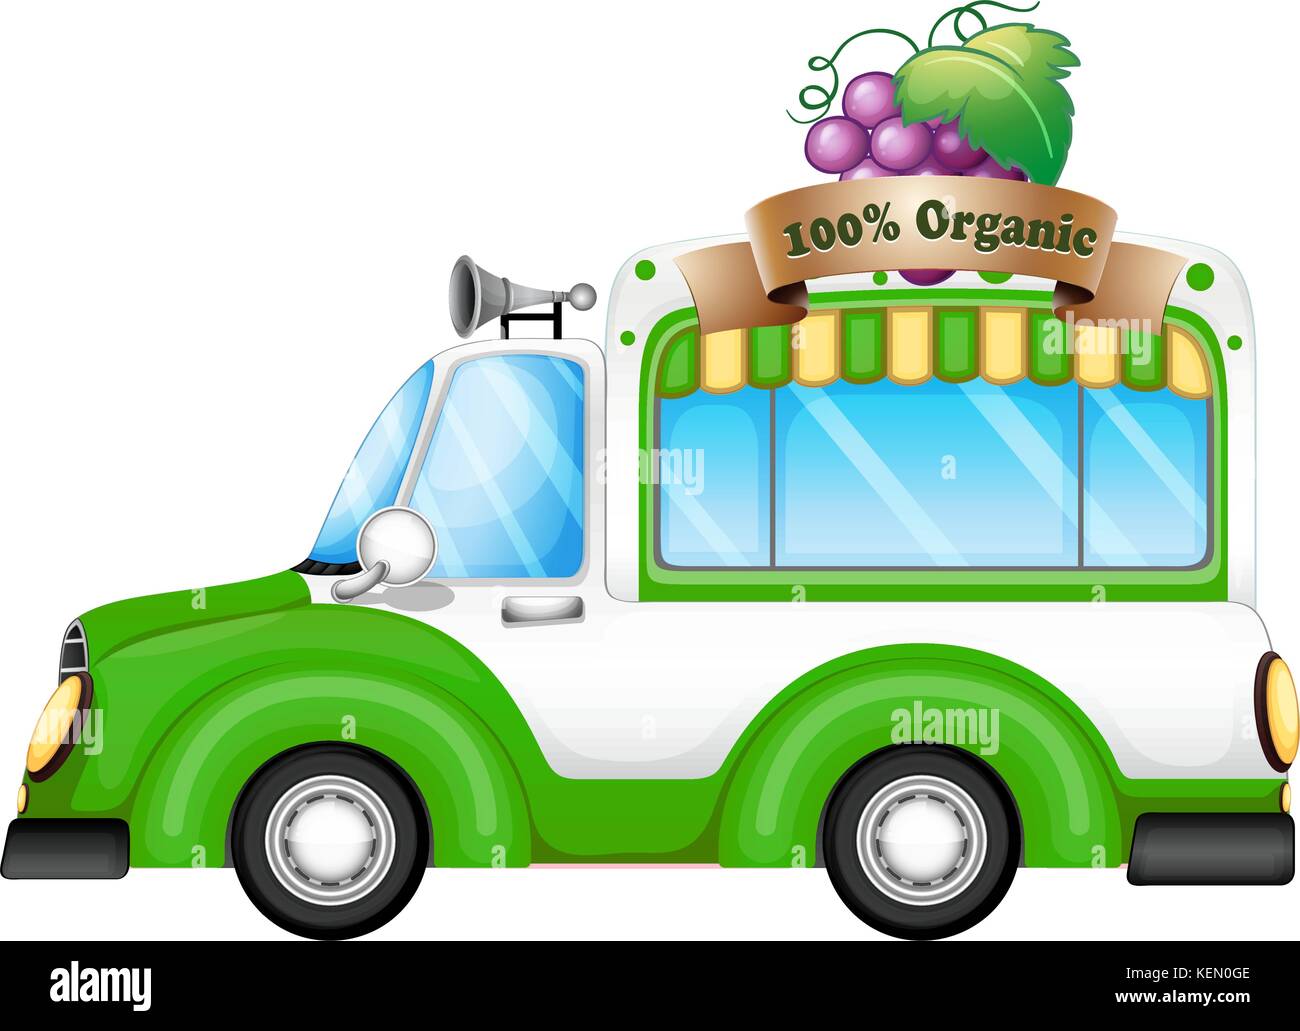 Illustration of a green vehicle selling organic fruits on a white background Stock Vector